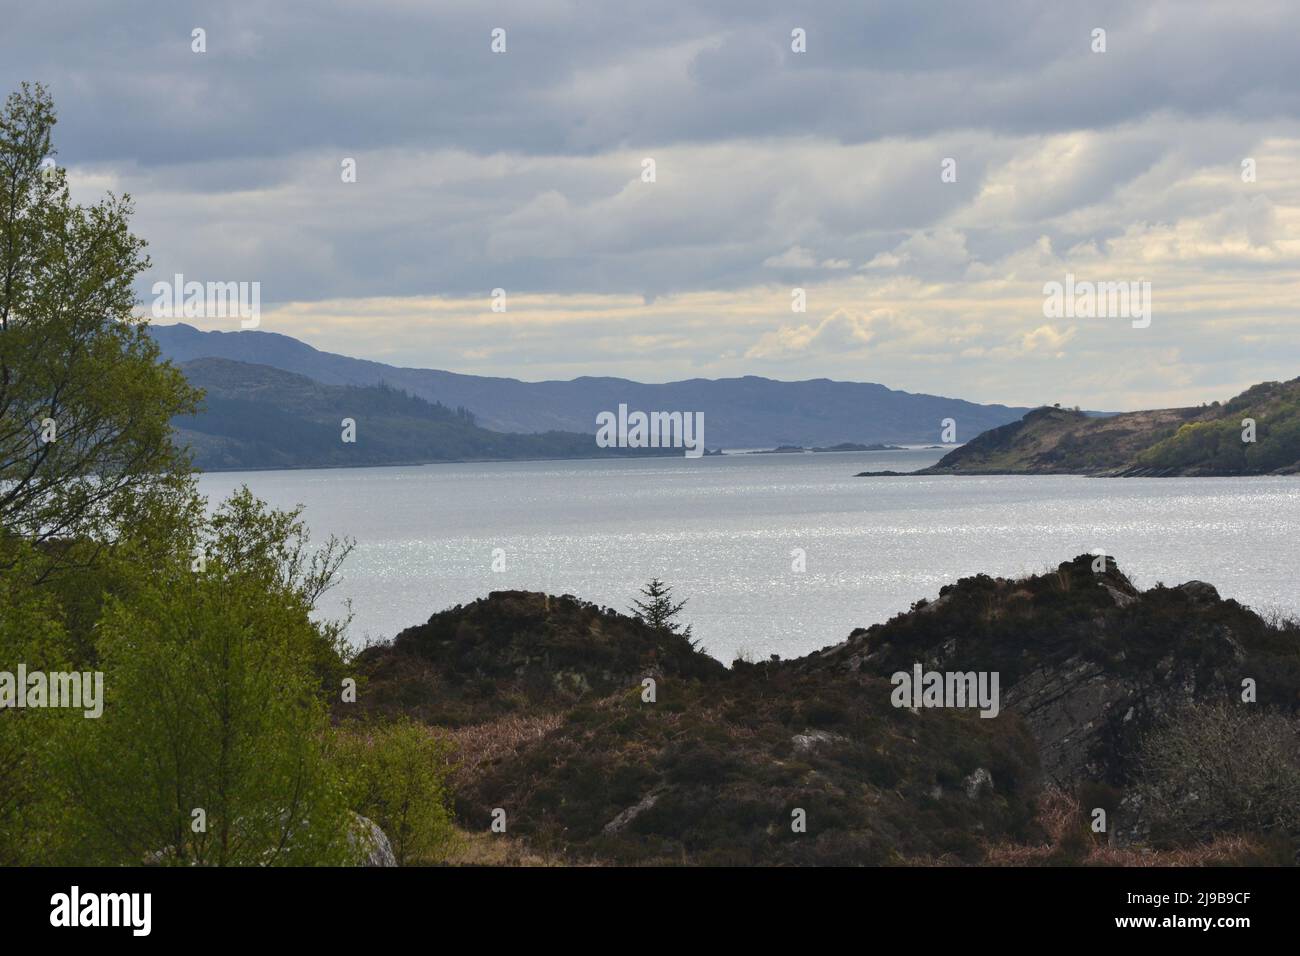 Photograph from the cafe at Glenelg ferry port over the Sound of Sleat towards the Isle of Skye. Stock Photo